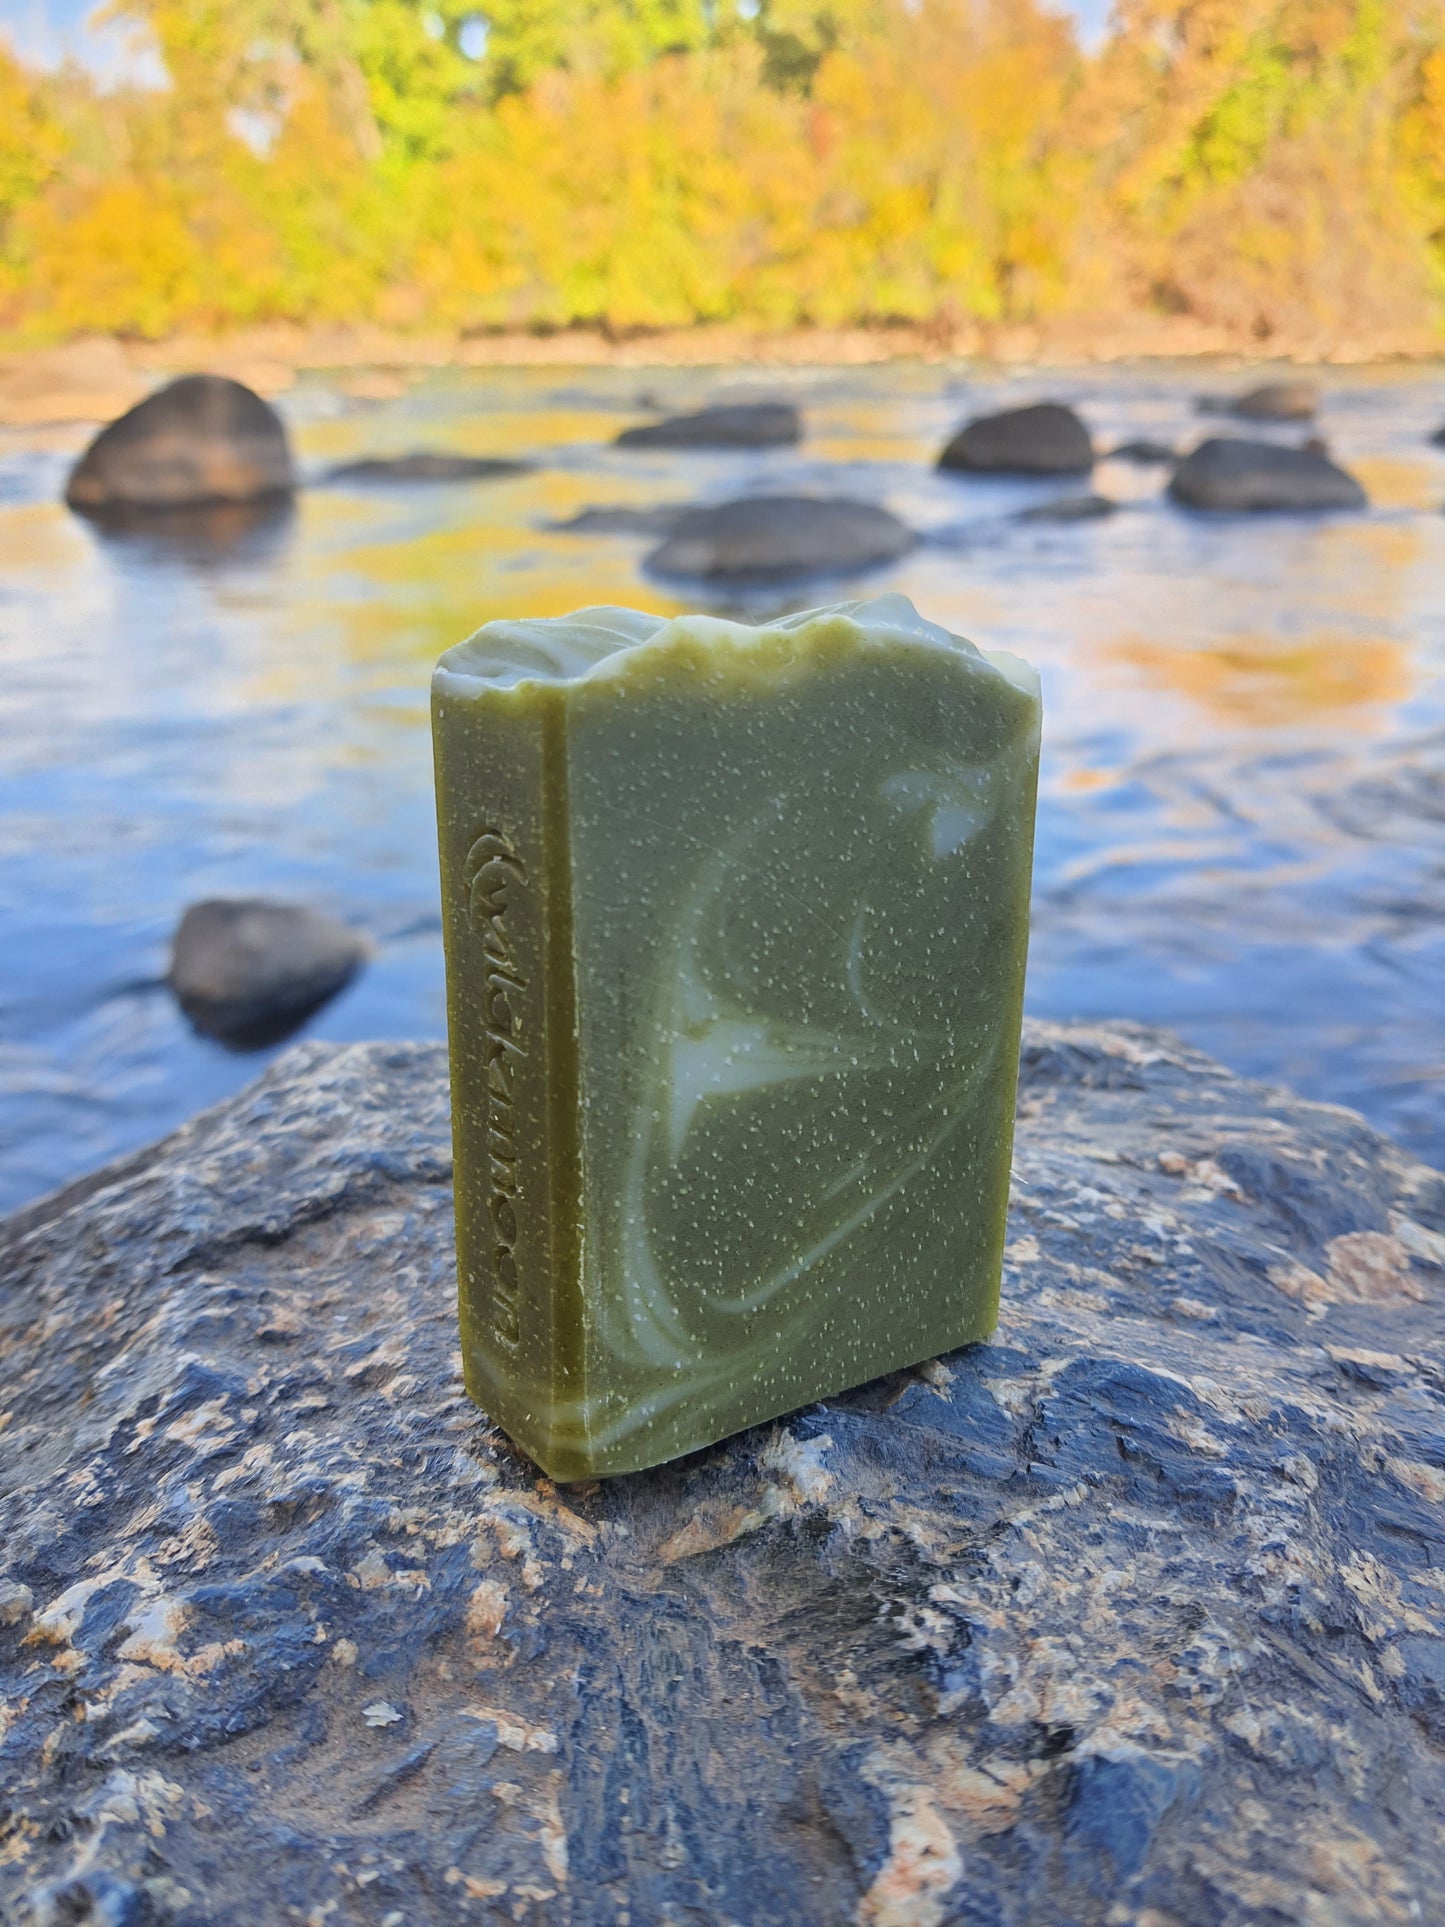 Herb garden artisan soap. Rectangular forest green soap with white swirls and wildermoon logo stamp on the side